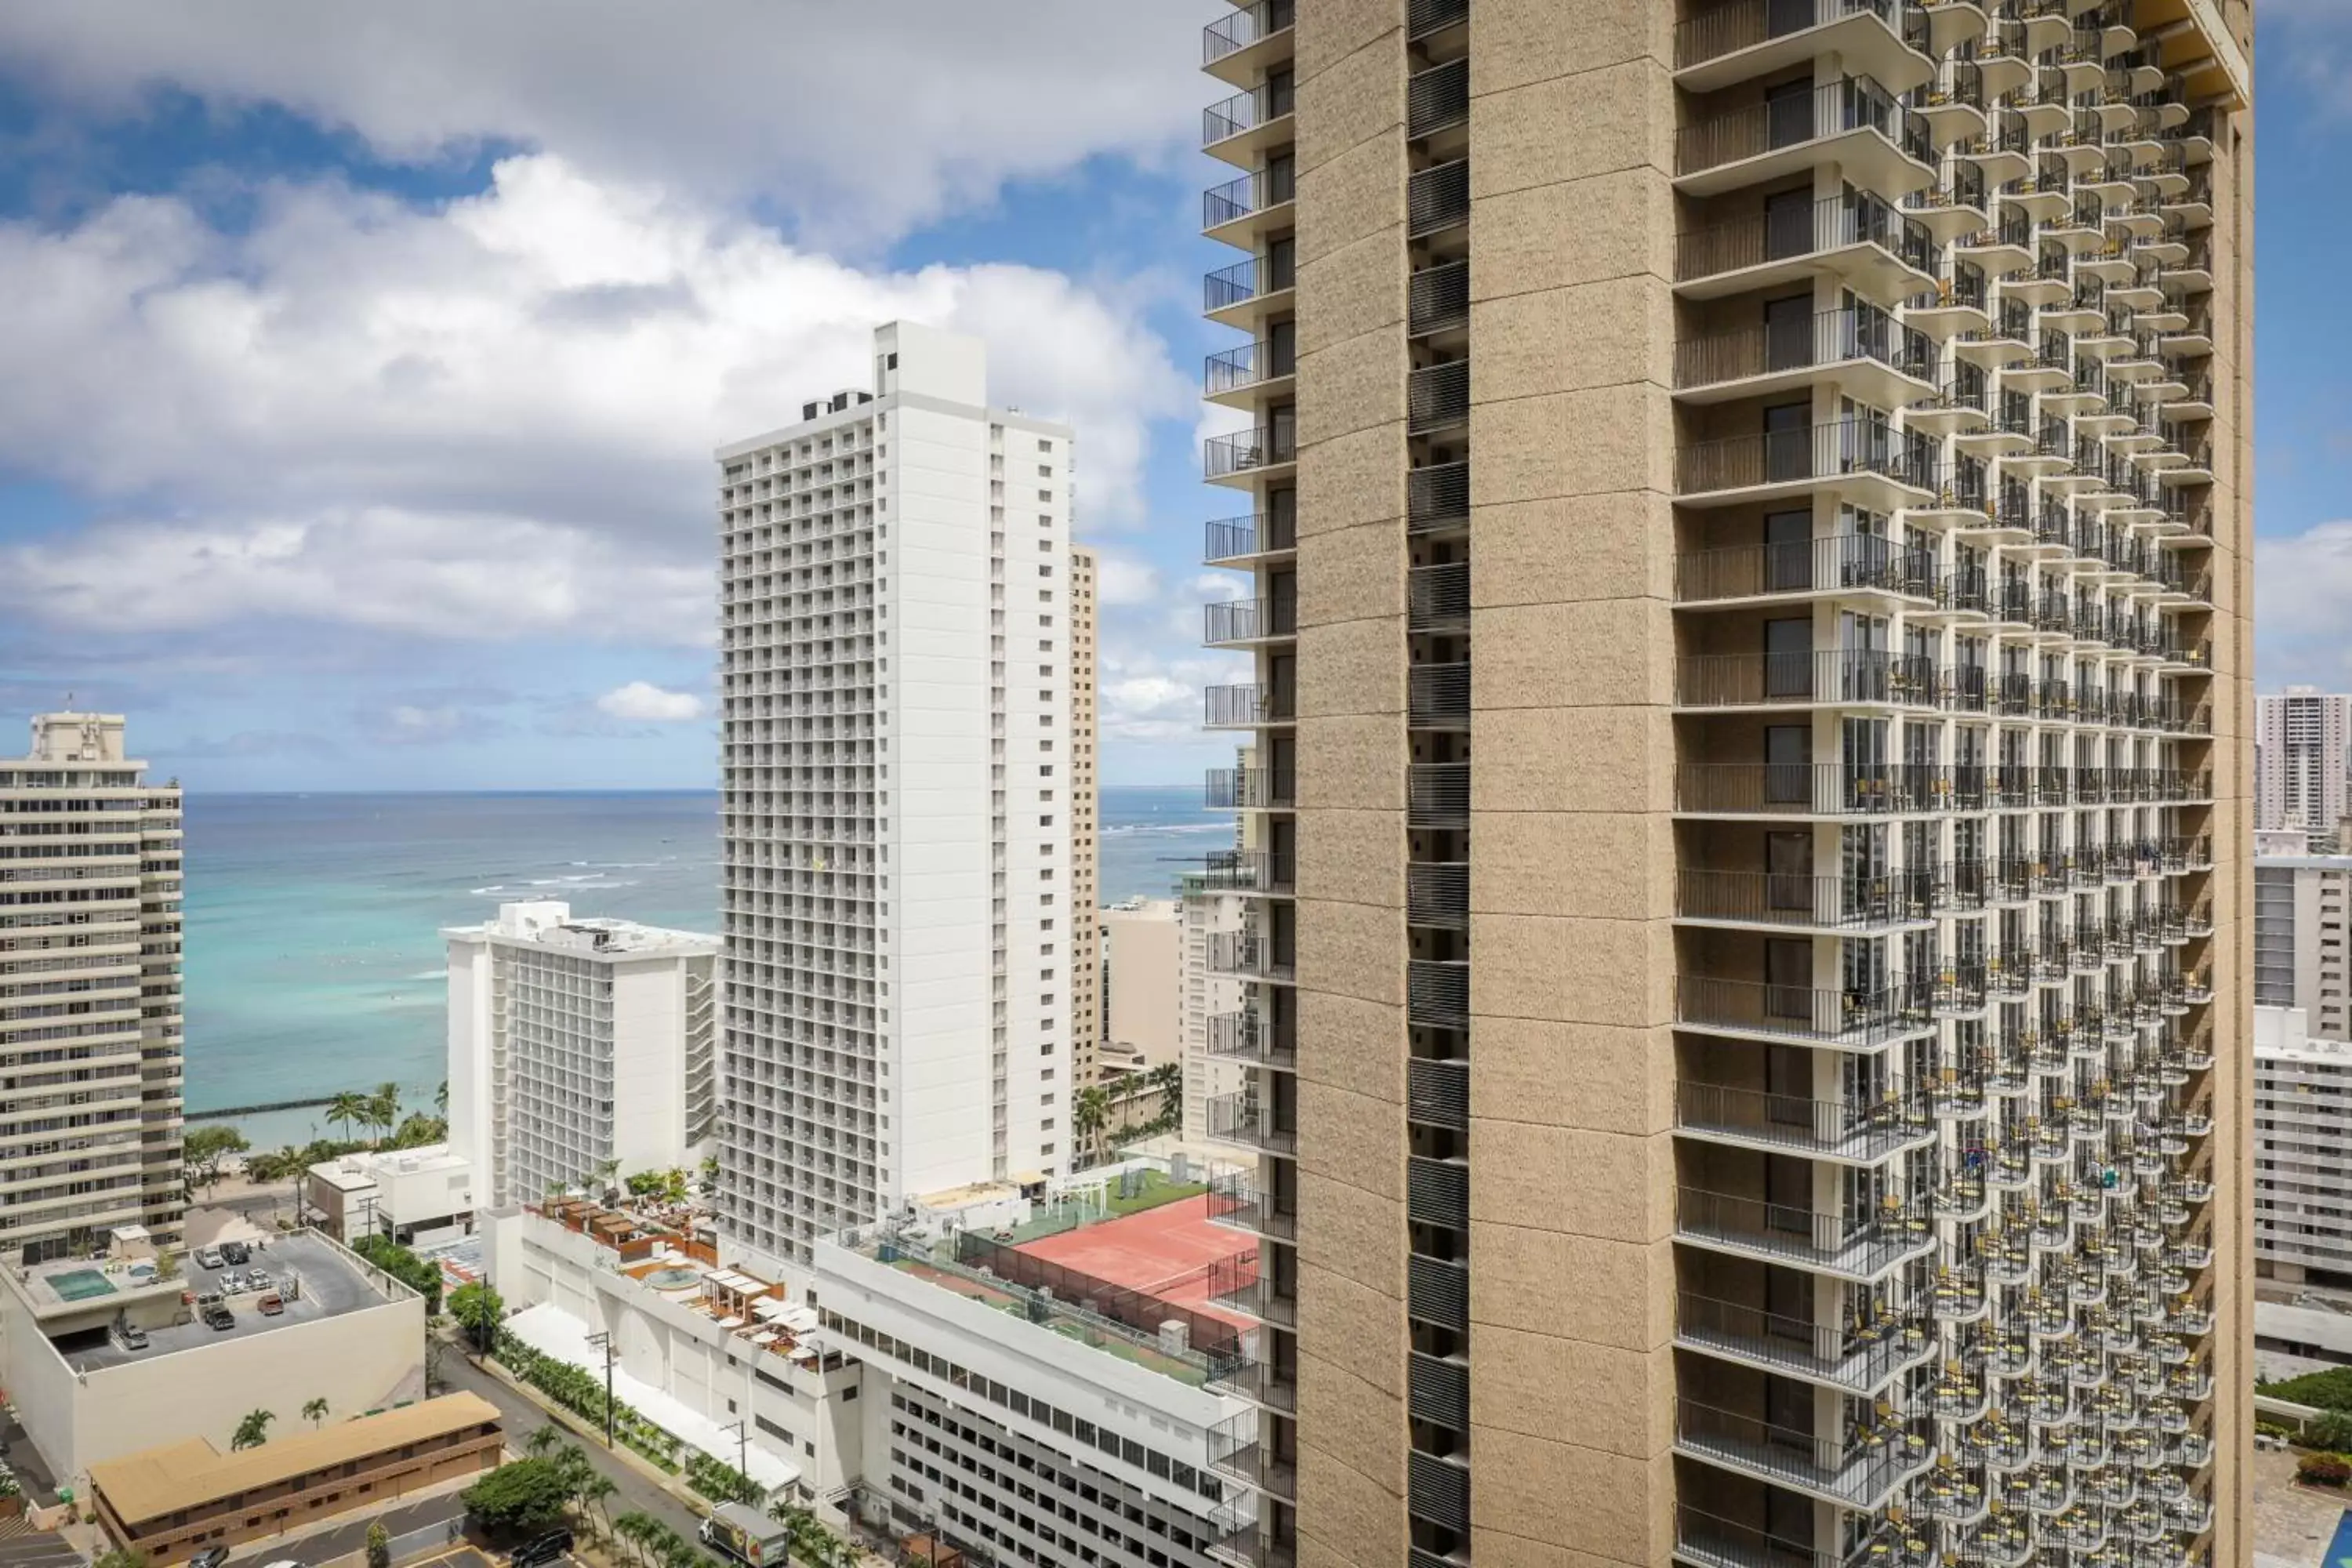 View (from property/room) in Aston at the Waikiki Banyan